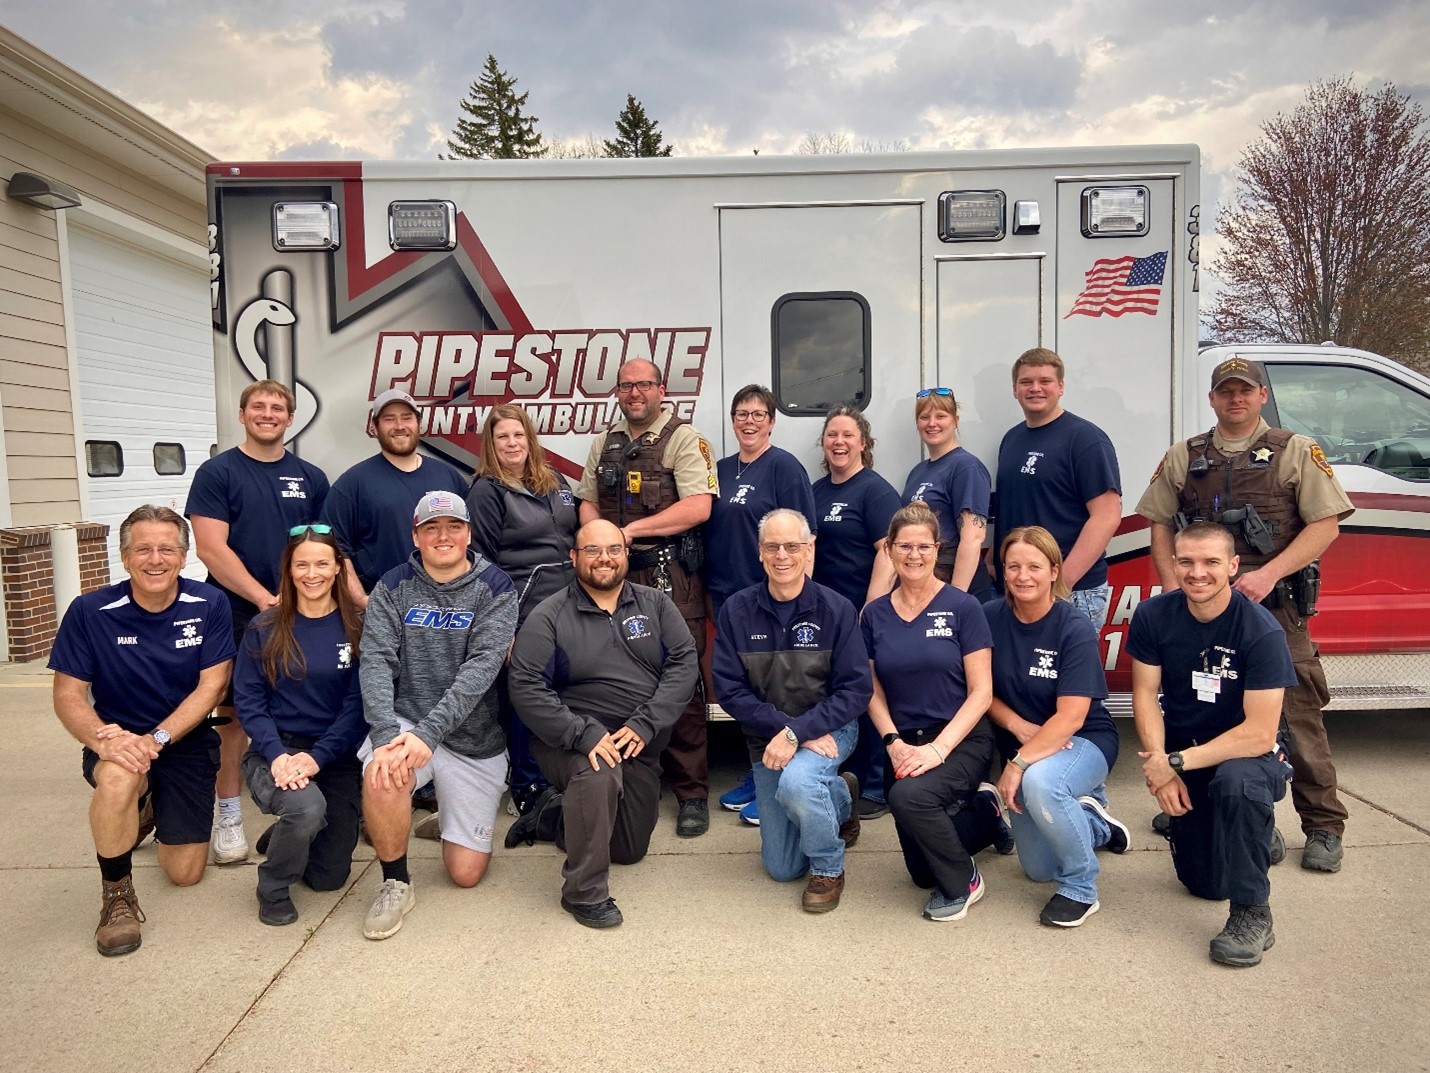 Pipestone Ambulance staff posing and smiling in front of ambulance